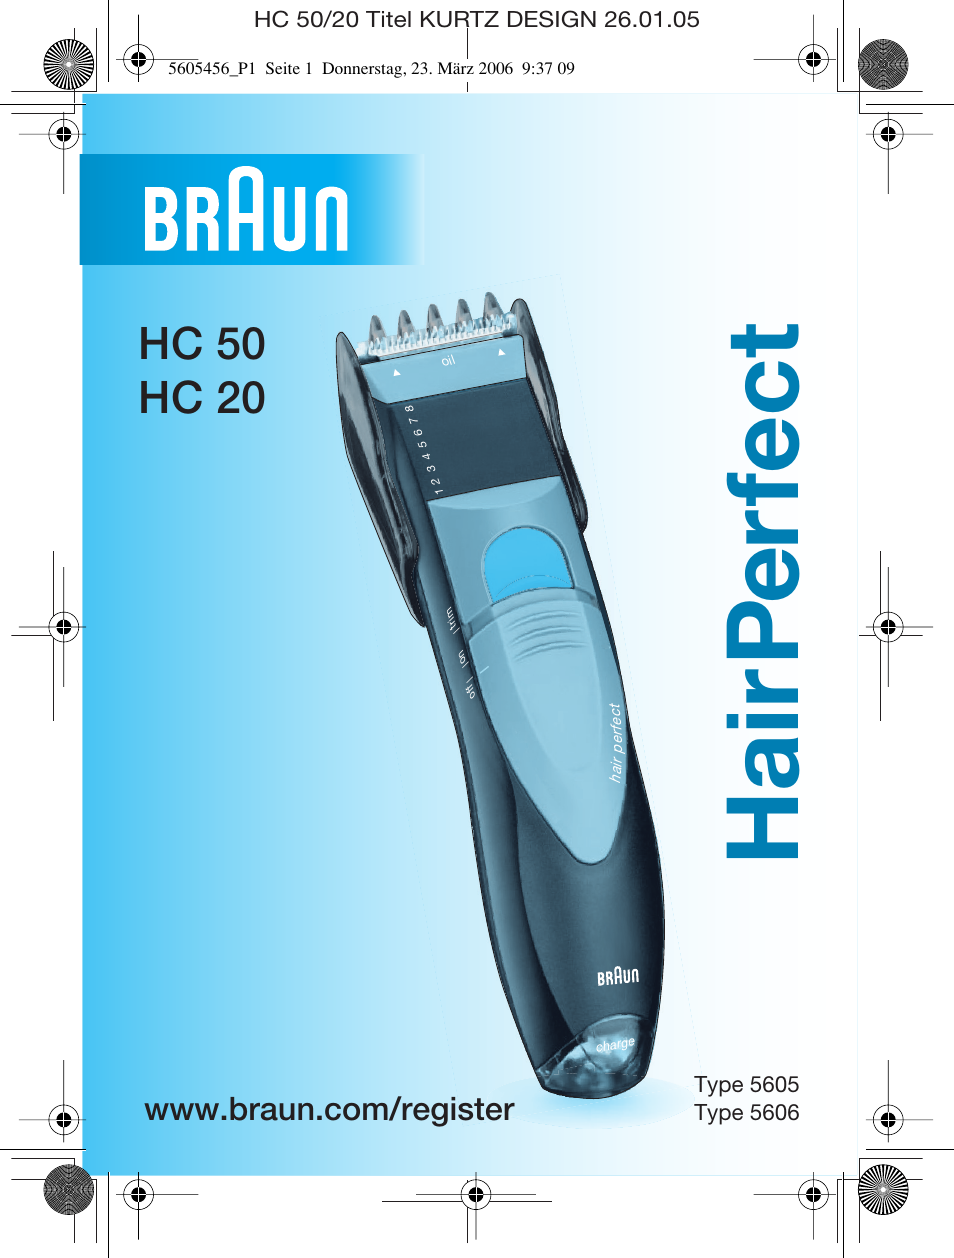 Braun HC 50 User Manual | 62 pages | Also for: HC 20